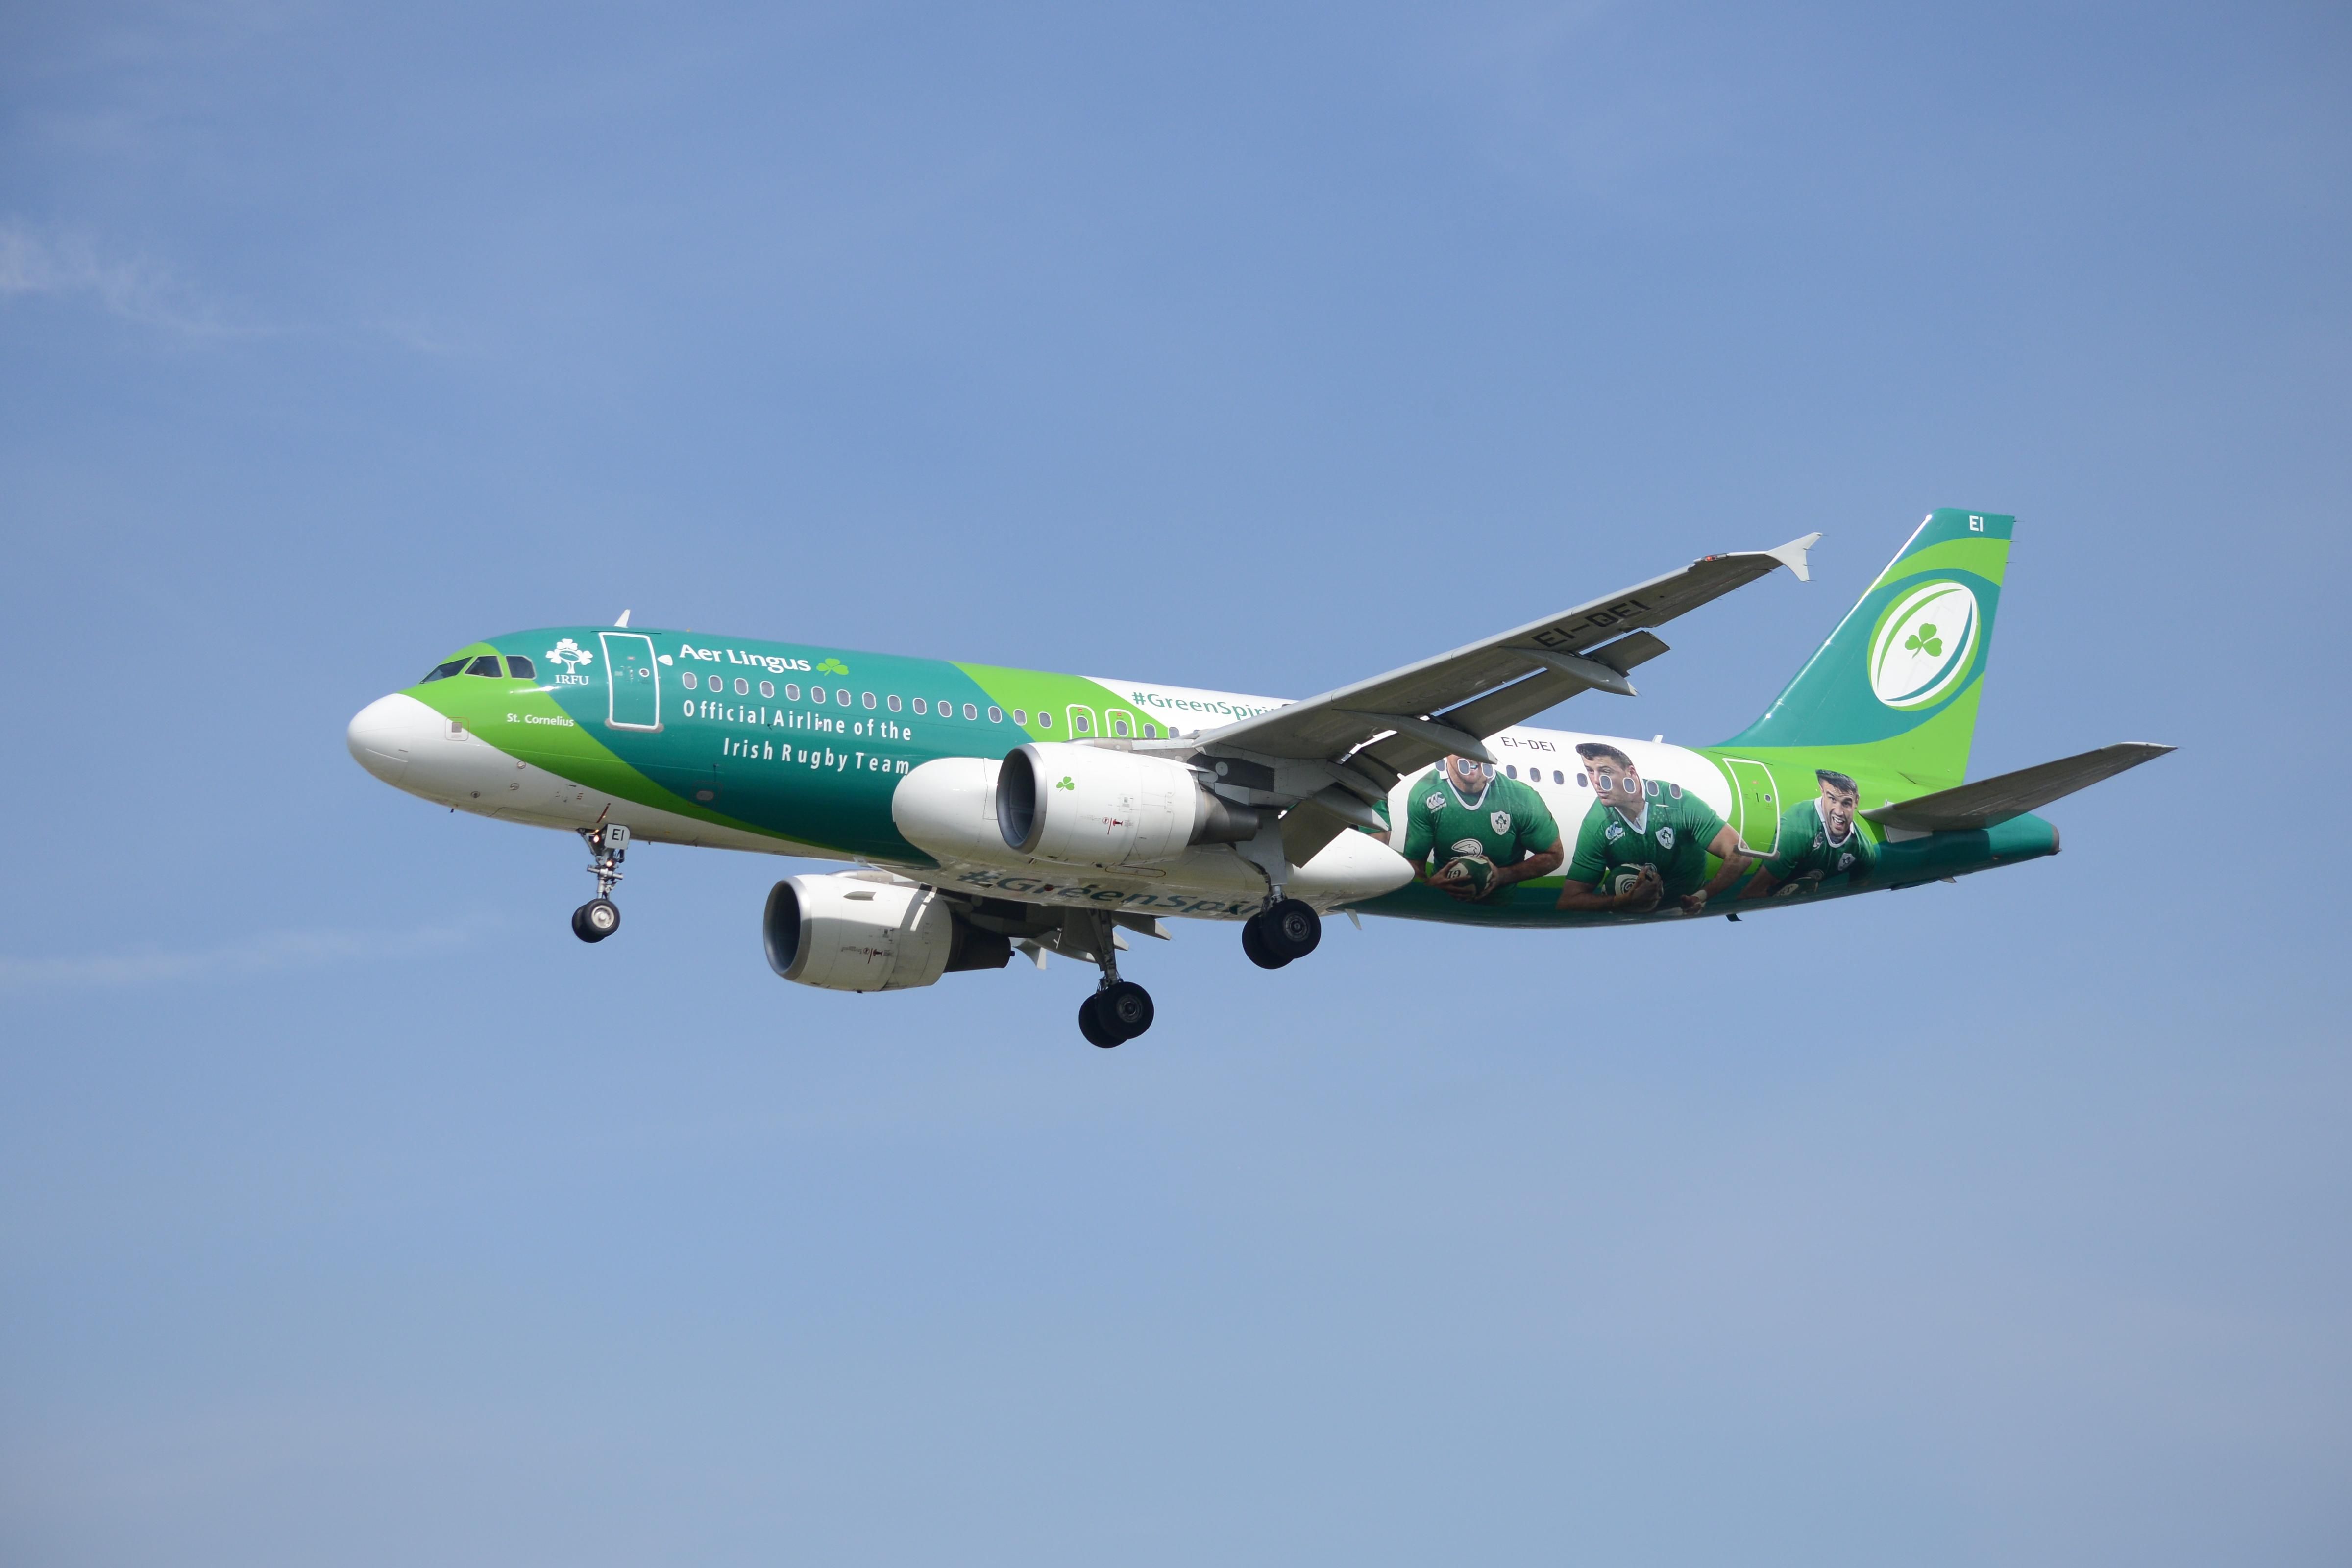 An Aer Lingus Airbus A320 flying in the sky.